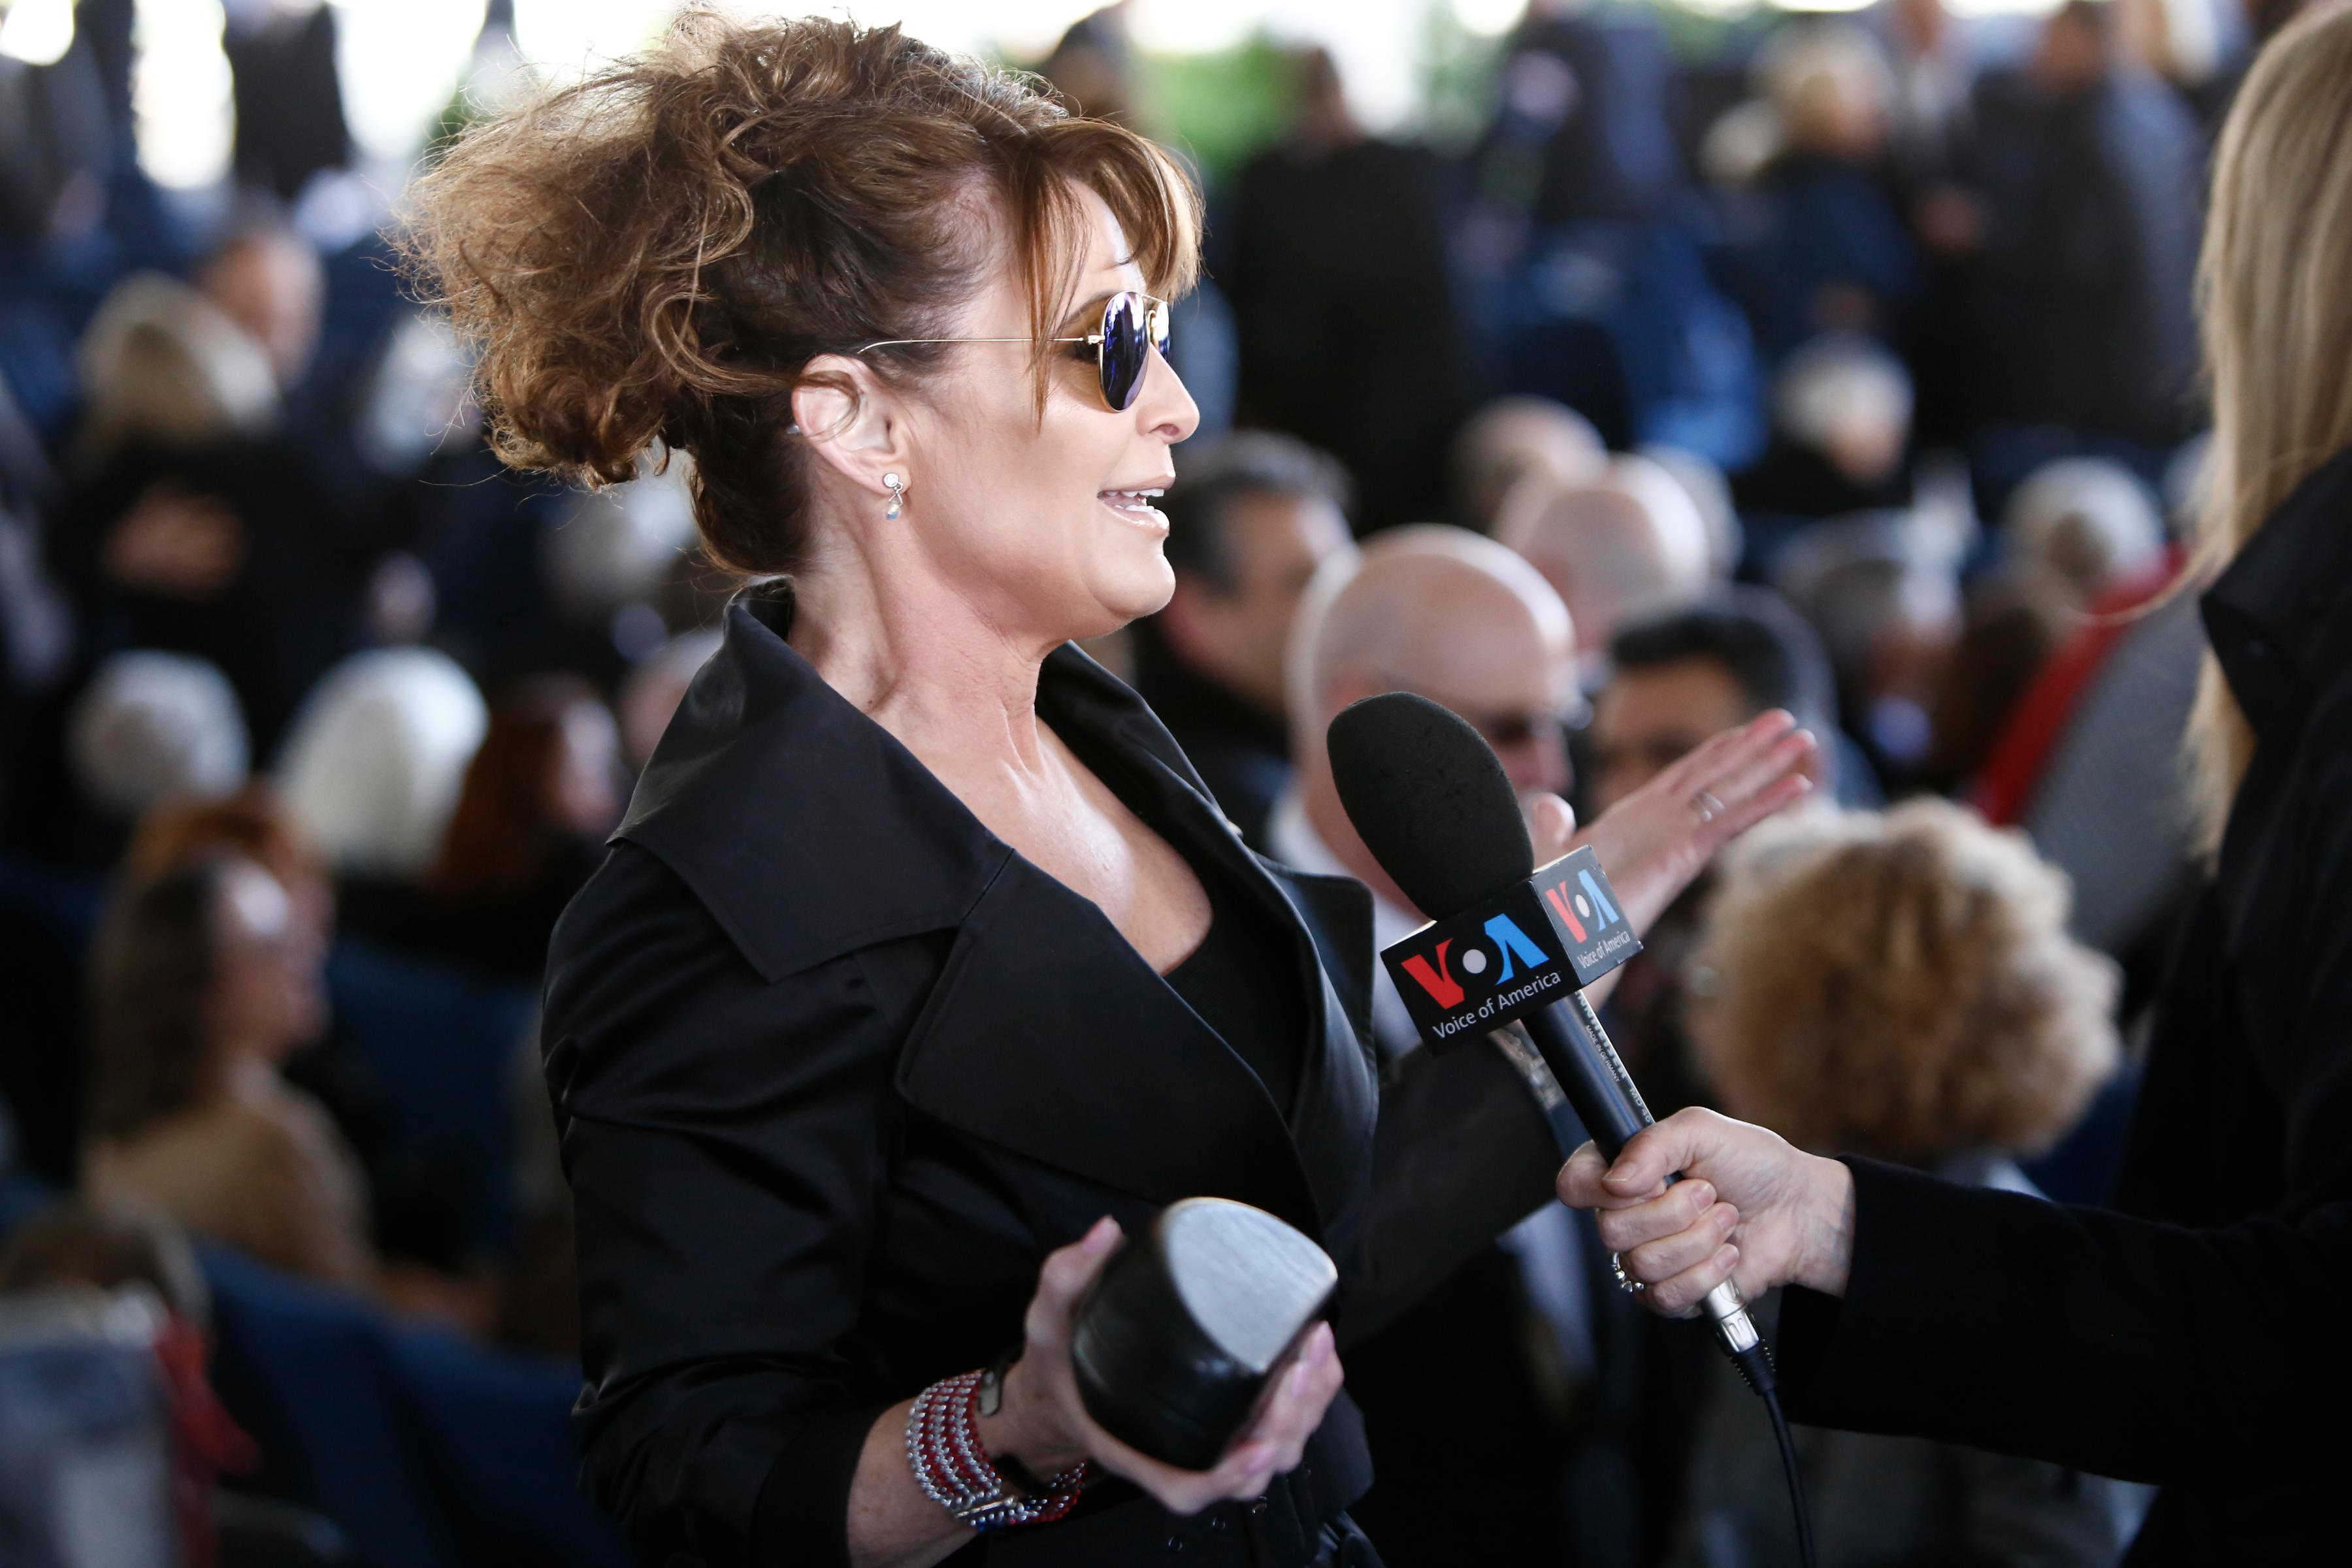 Sarah Palin, wearing black, talks to a Voice of America reporter at Billy Graham's funeral.